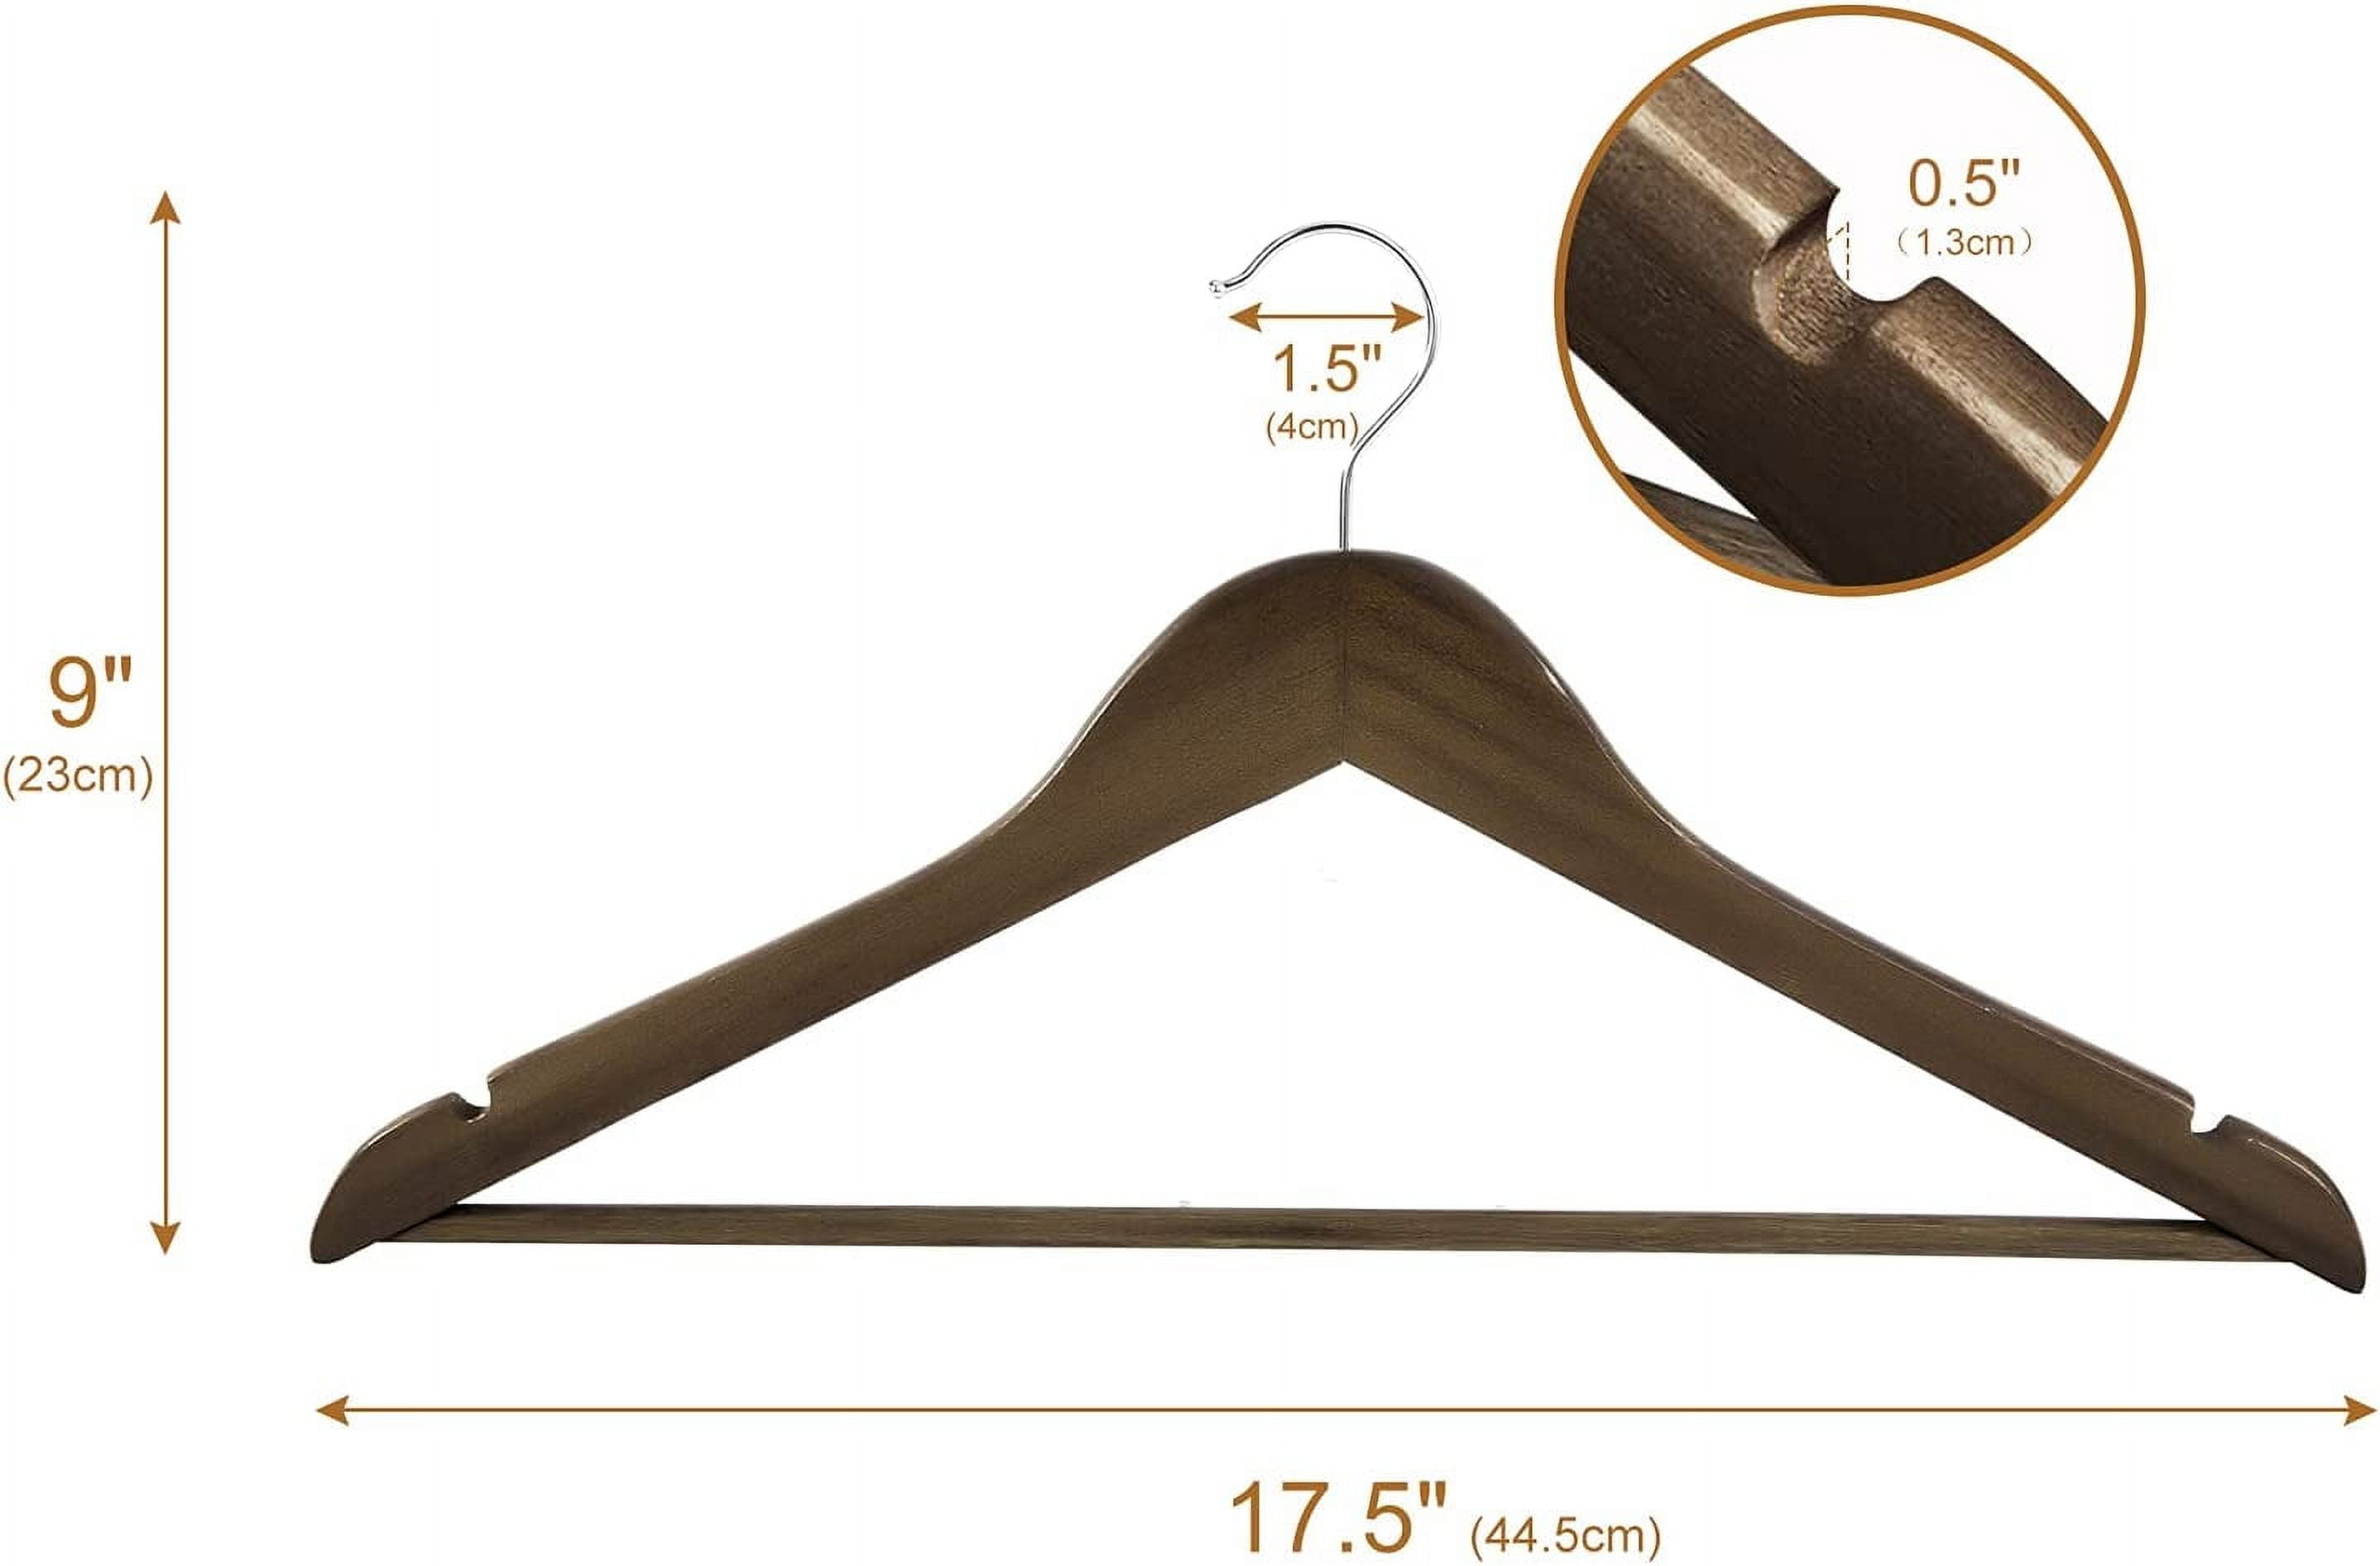 Ulimart Wood Hangers 20 Pack Smooth Finish Wooden Hangers,Durable